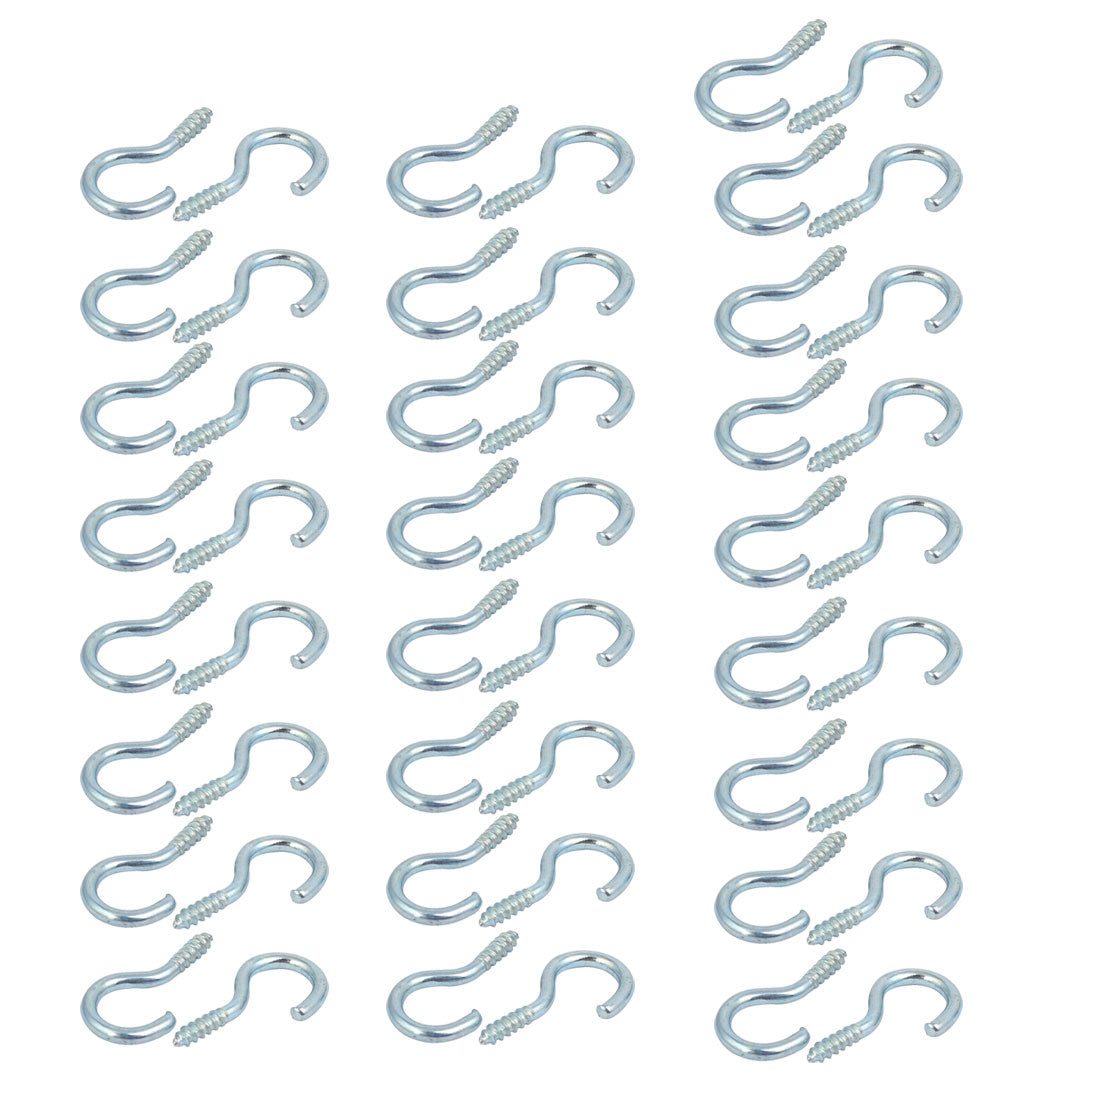 uxcell Uxcell 2.2mm Dia Thread 20mm Length Iron Zinc Plated Self-Tapping Eye Screw Hook 50pcs